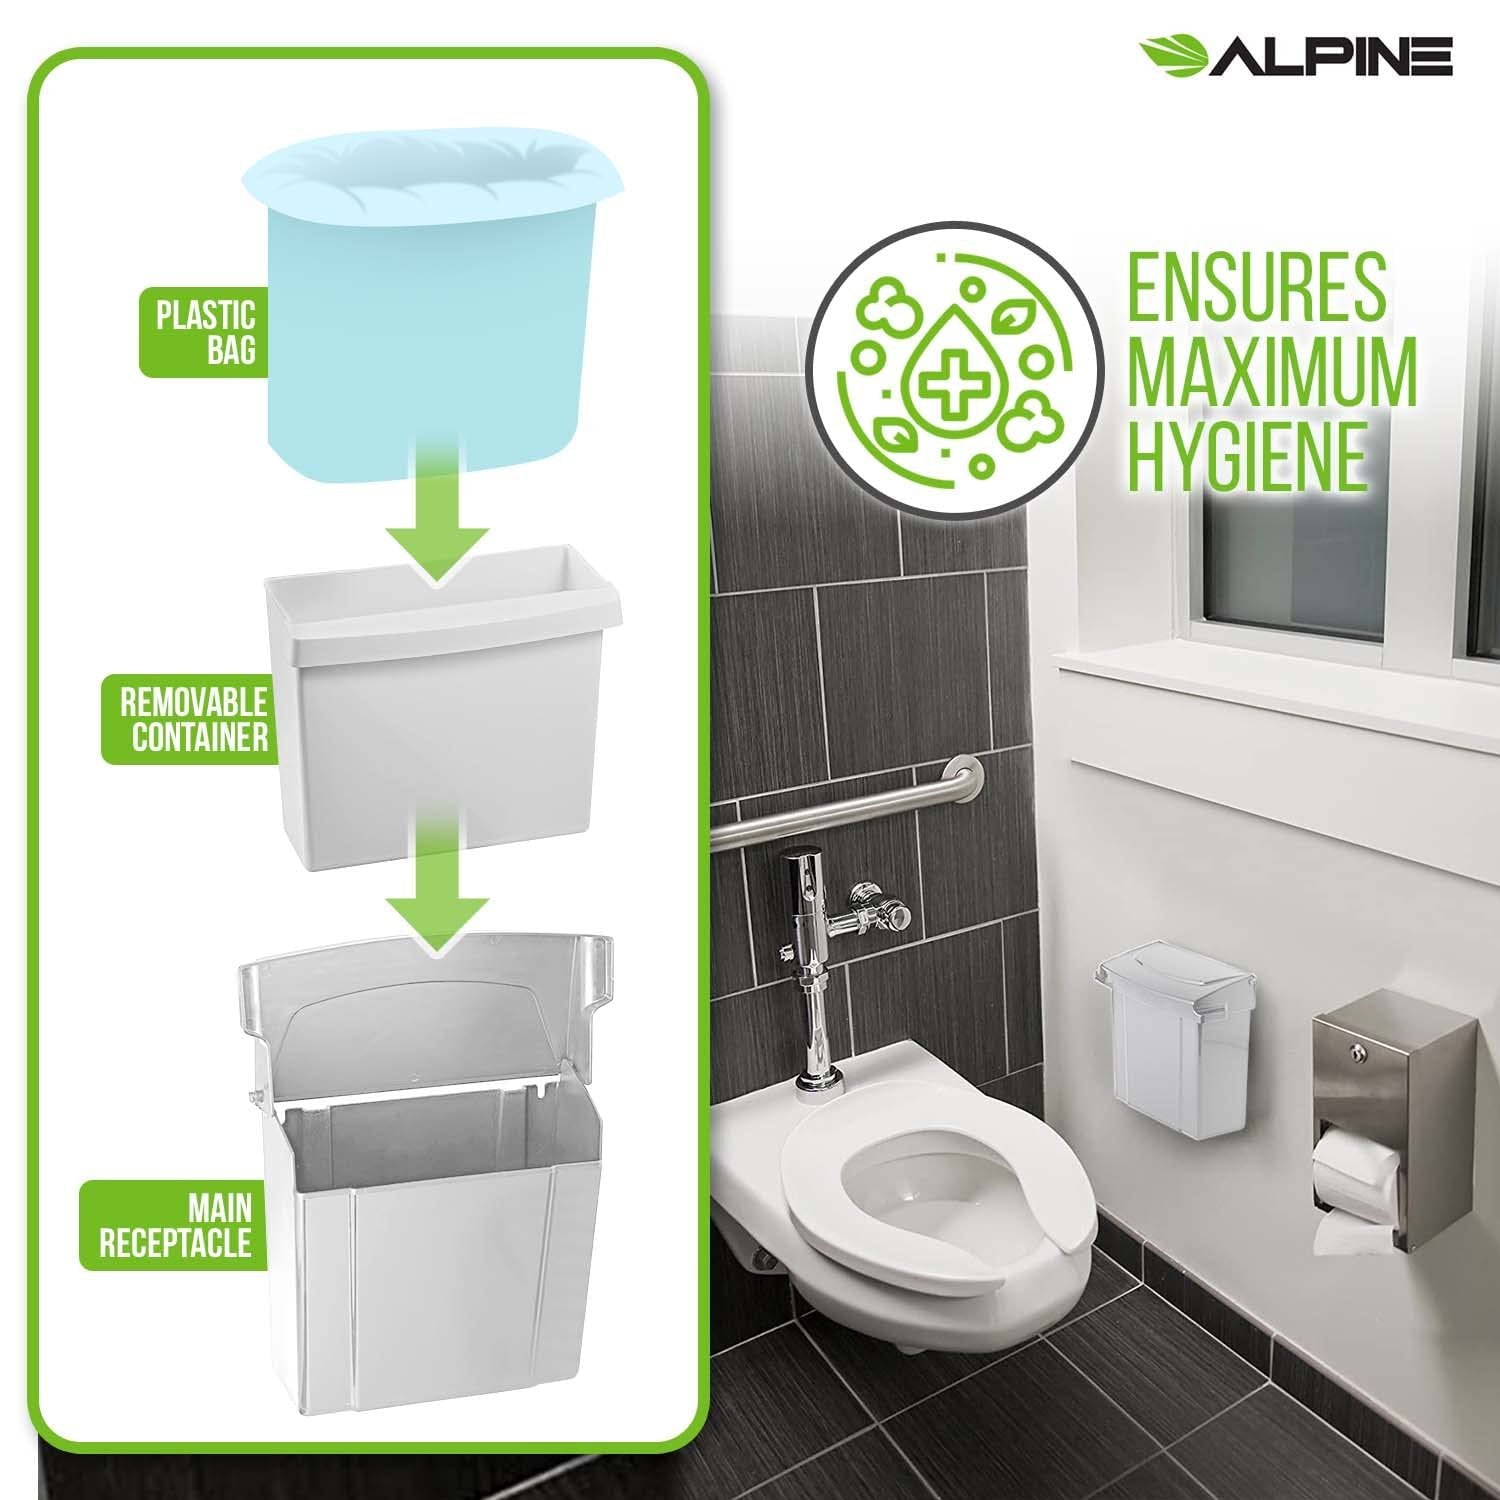 Alpine Industries Sanitary Napkin Receptacle - White, Pack of 1 - Odor-Sealing, Durable ABS Plastic - Free Shipping & Returns